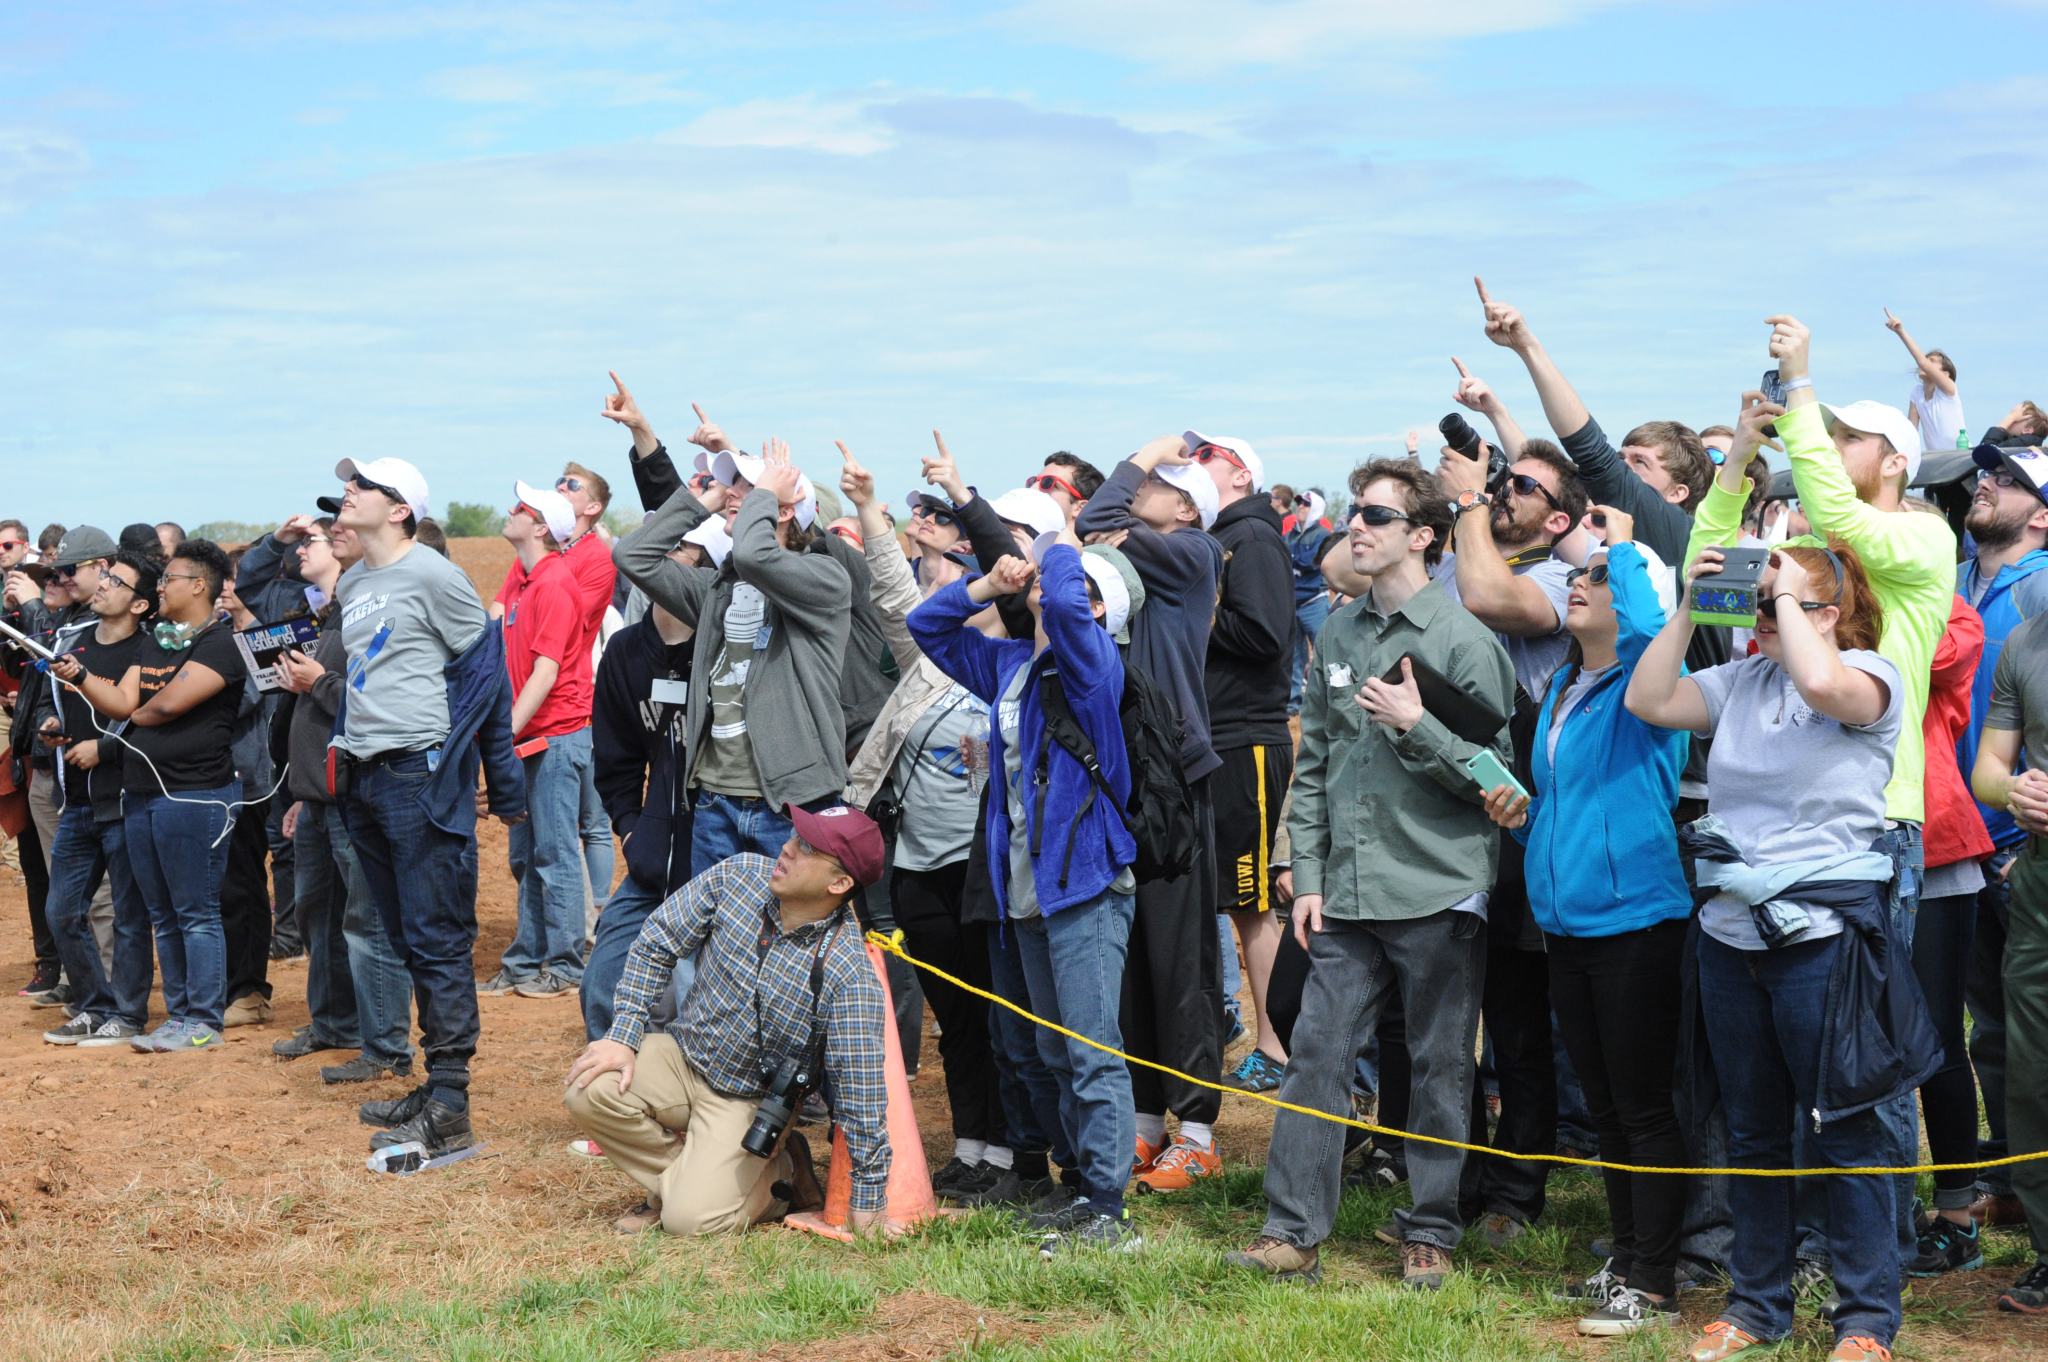 Hundreds gather to watch high-powered rocket launches during the Student Launch challenge, April 16.